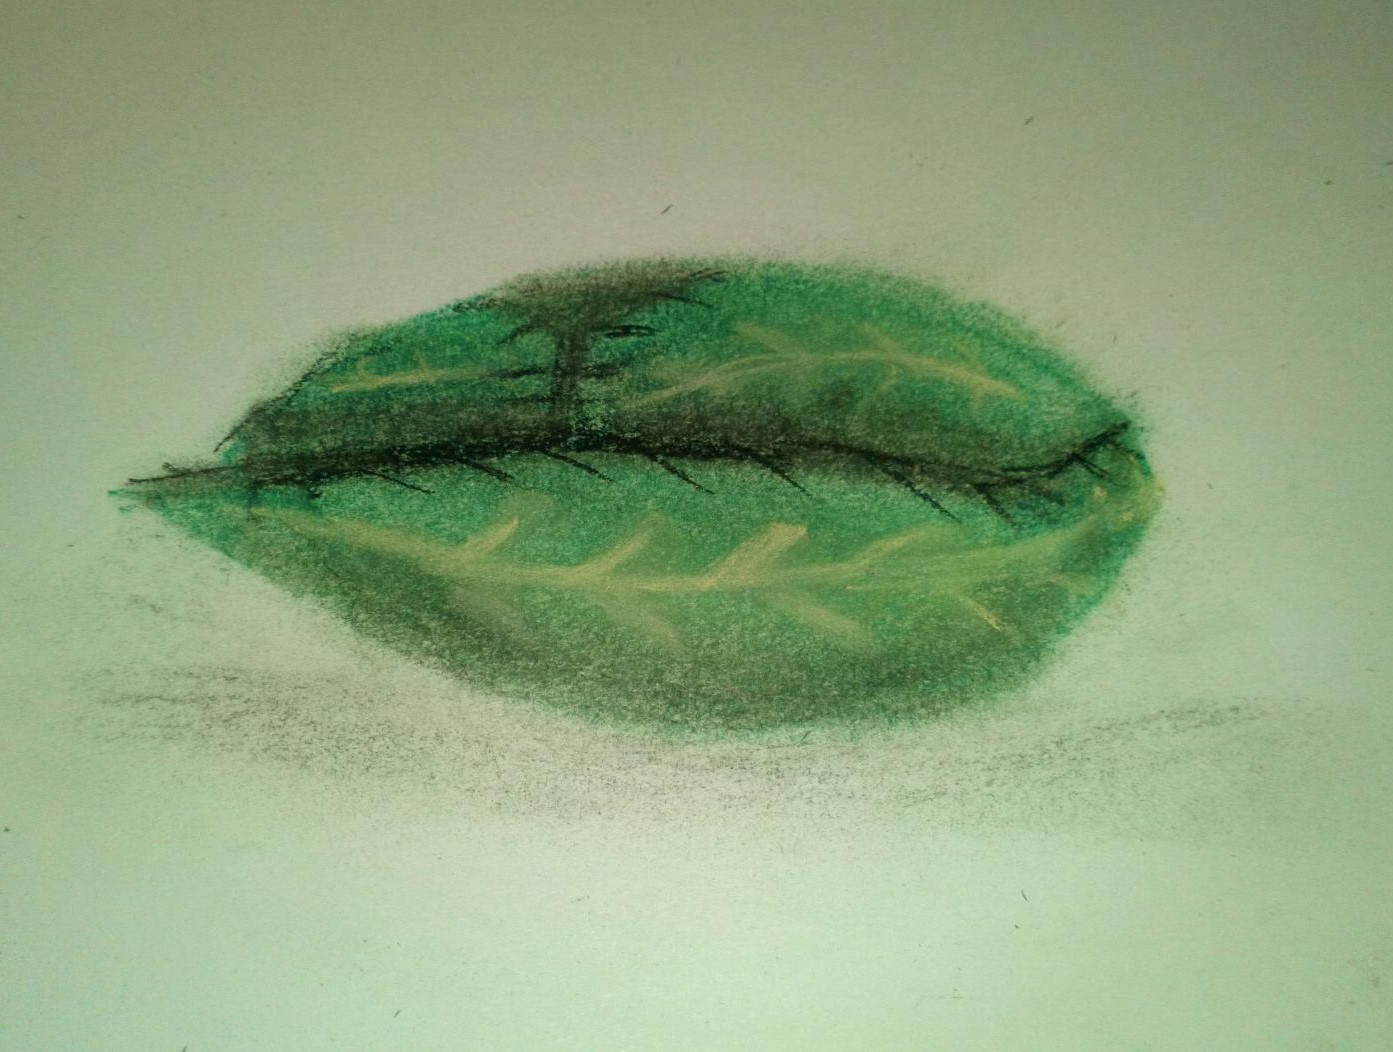 A pastel drawing of a sandwhich made of leaves